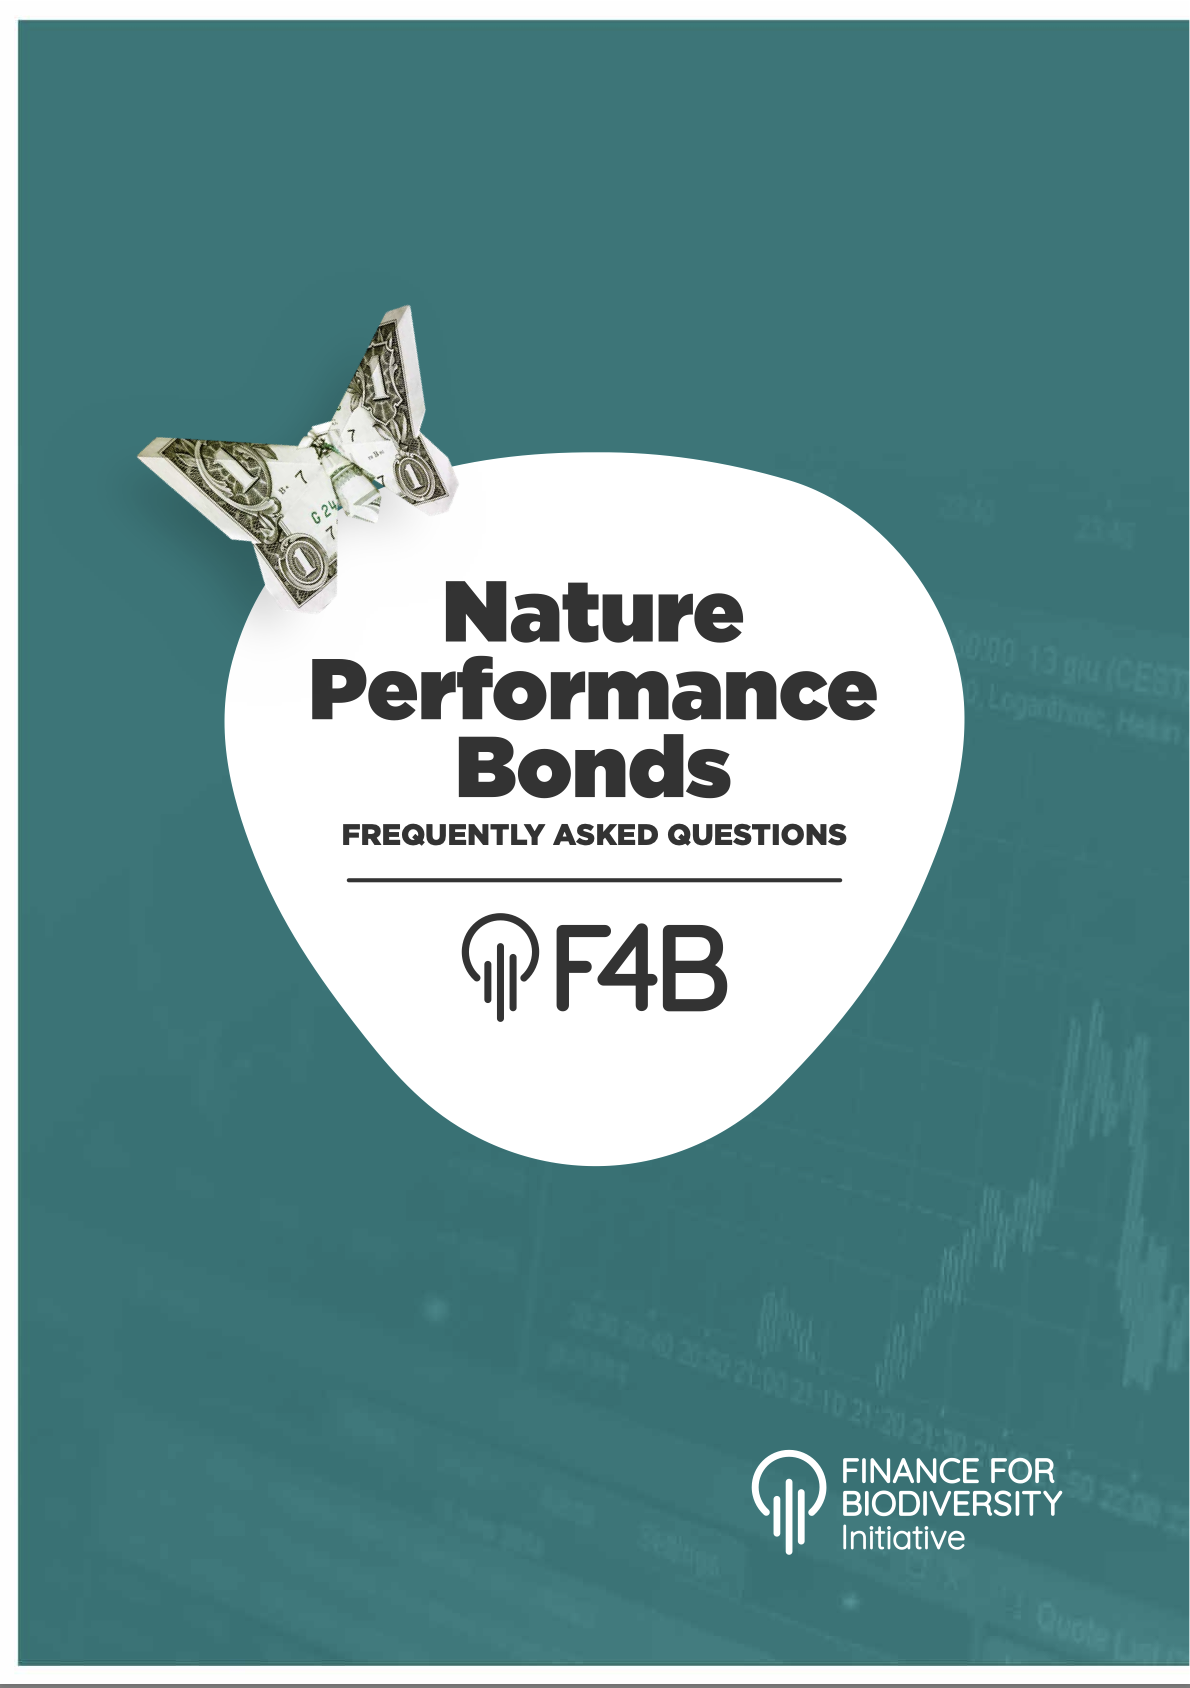 Nature Performance Bonds – Frequently Asked Questions